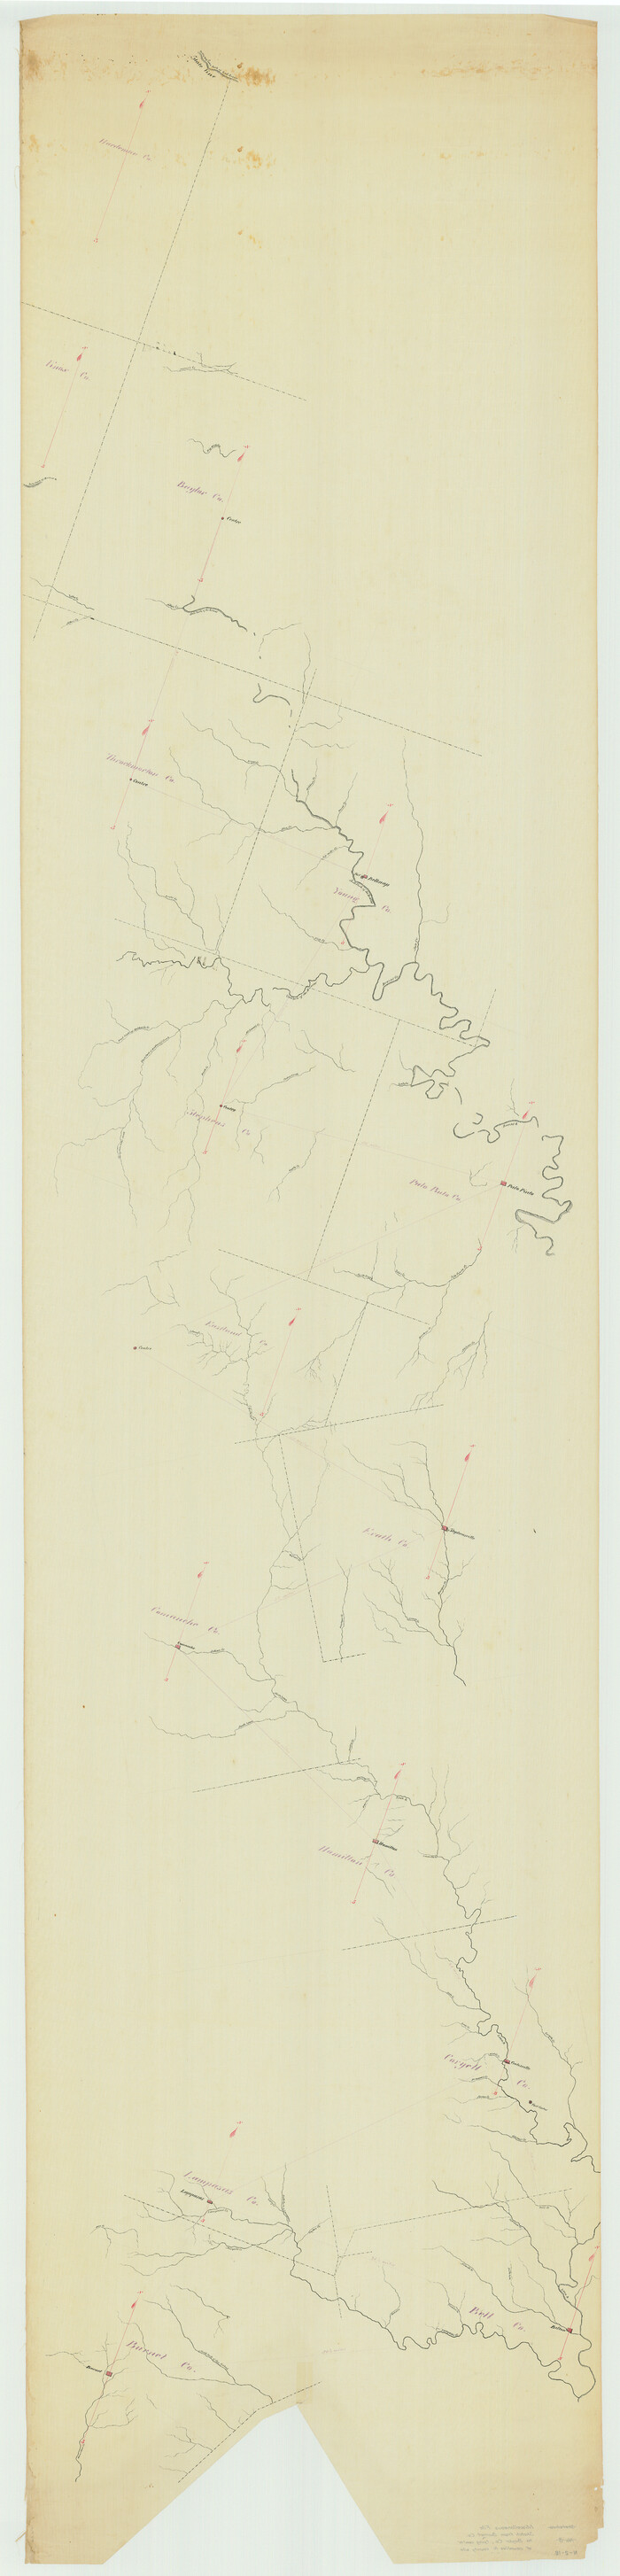 1699, [Sketch from Burnet Co. to Baylor Co. tying center of counties to county site], General Map Collection